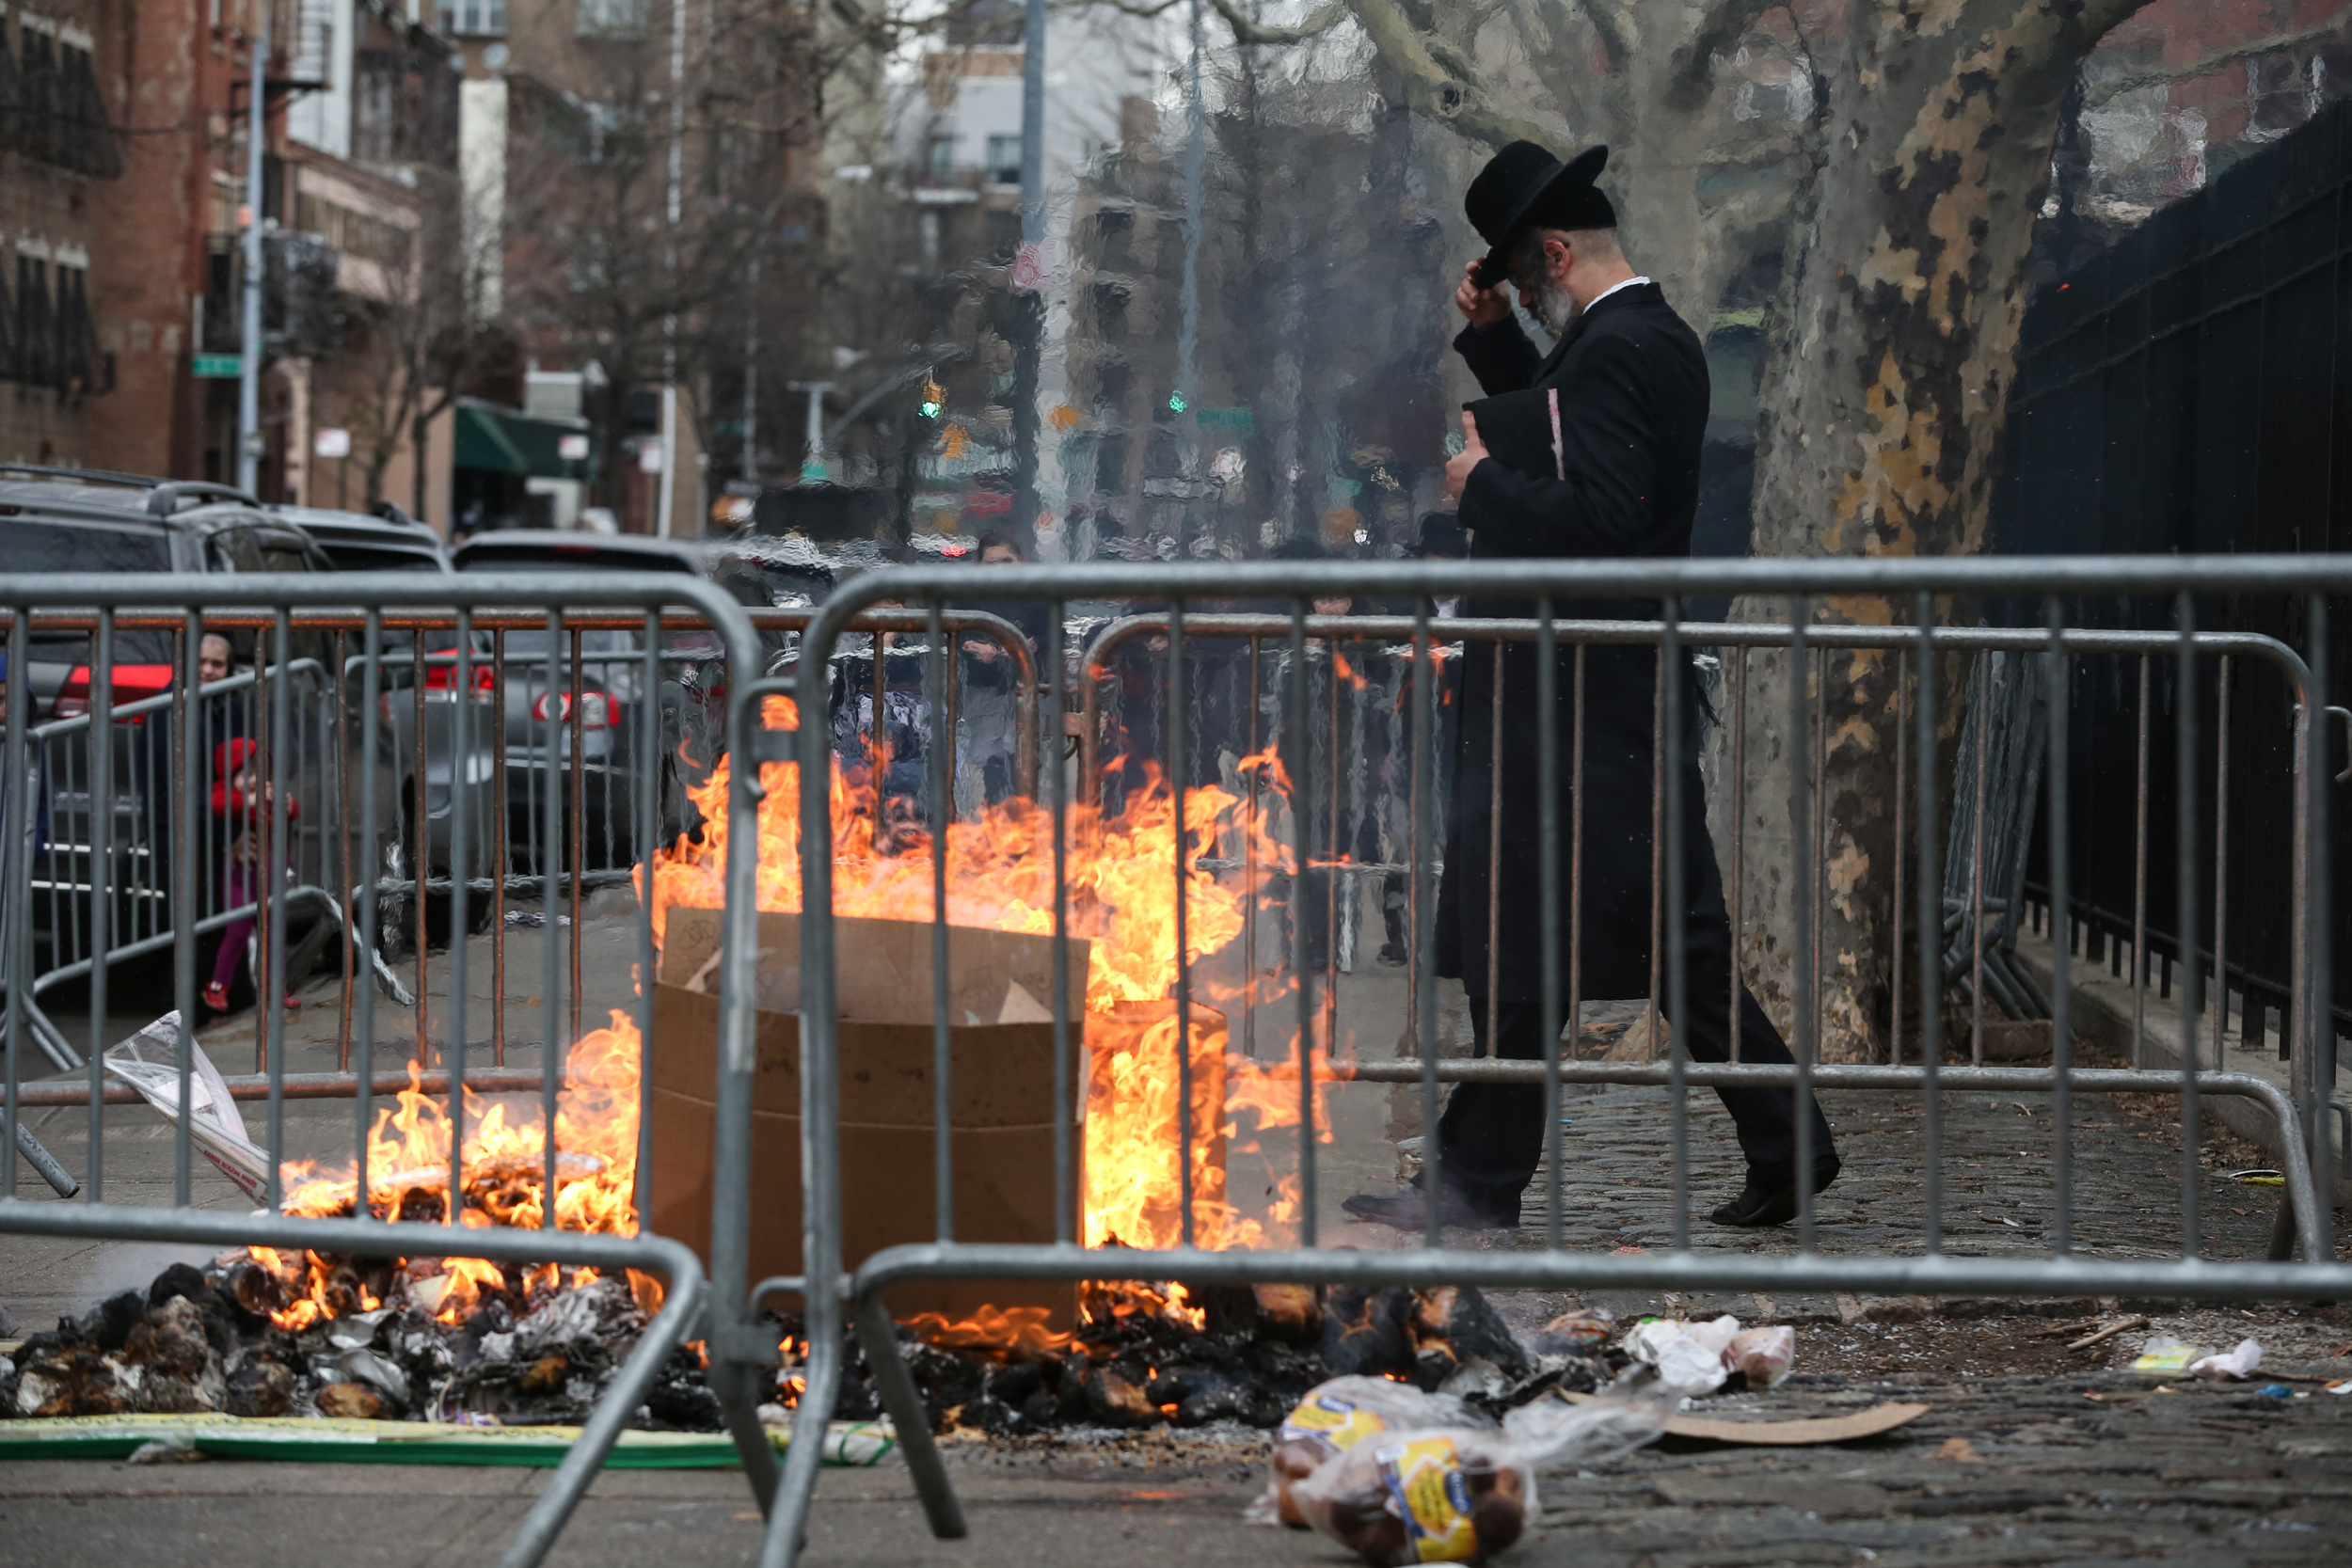  A Hasidic man prays during "The Burning of the Bread" marking the start of Passover 